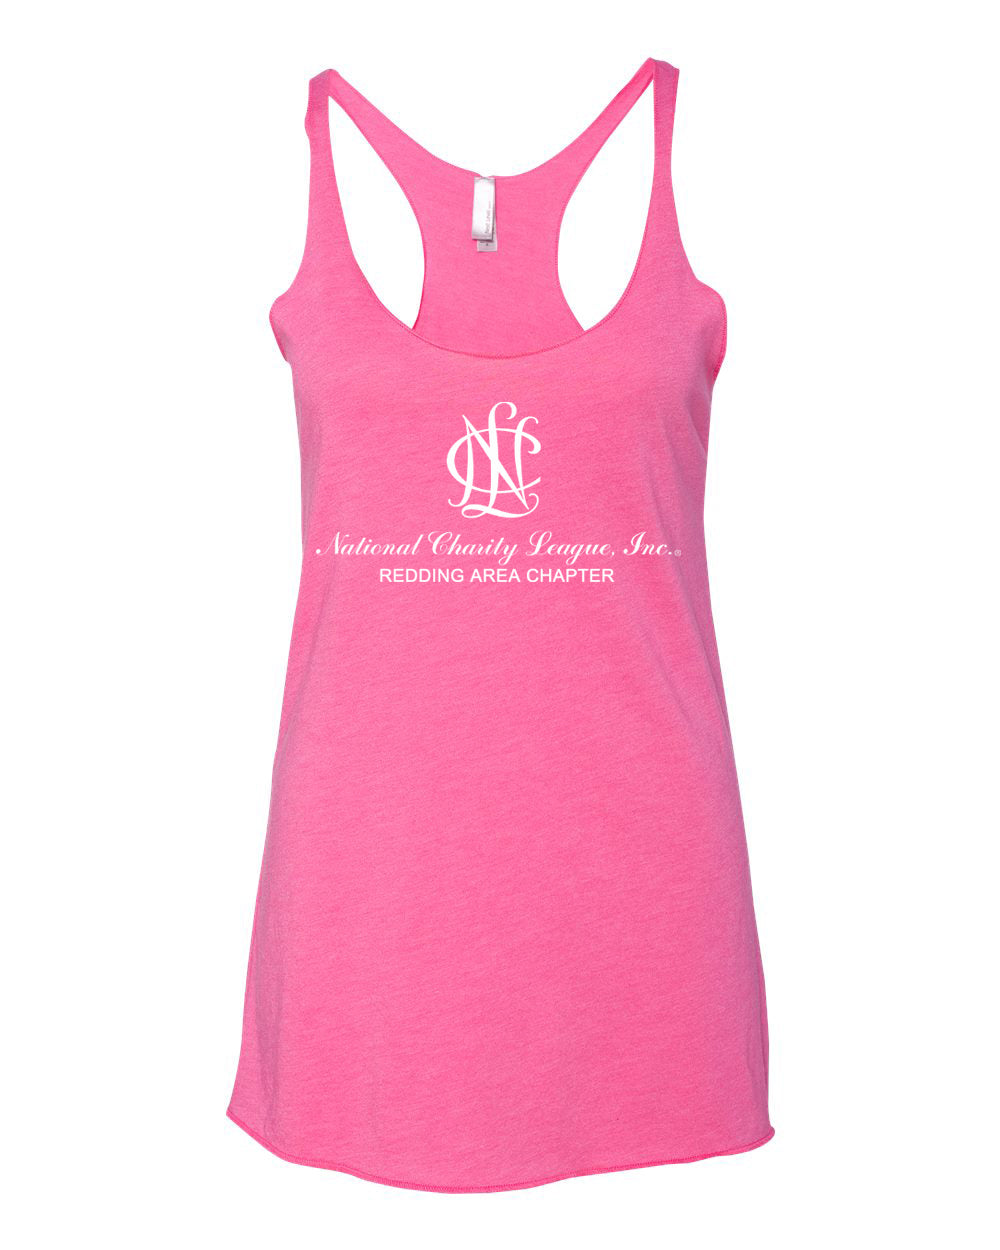 Monogrammed Triblend Racerback Tank Top - Turquoise / S / Top in